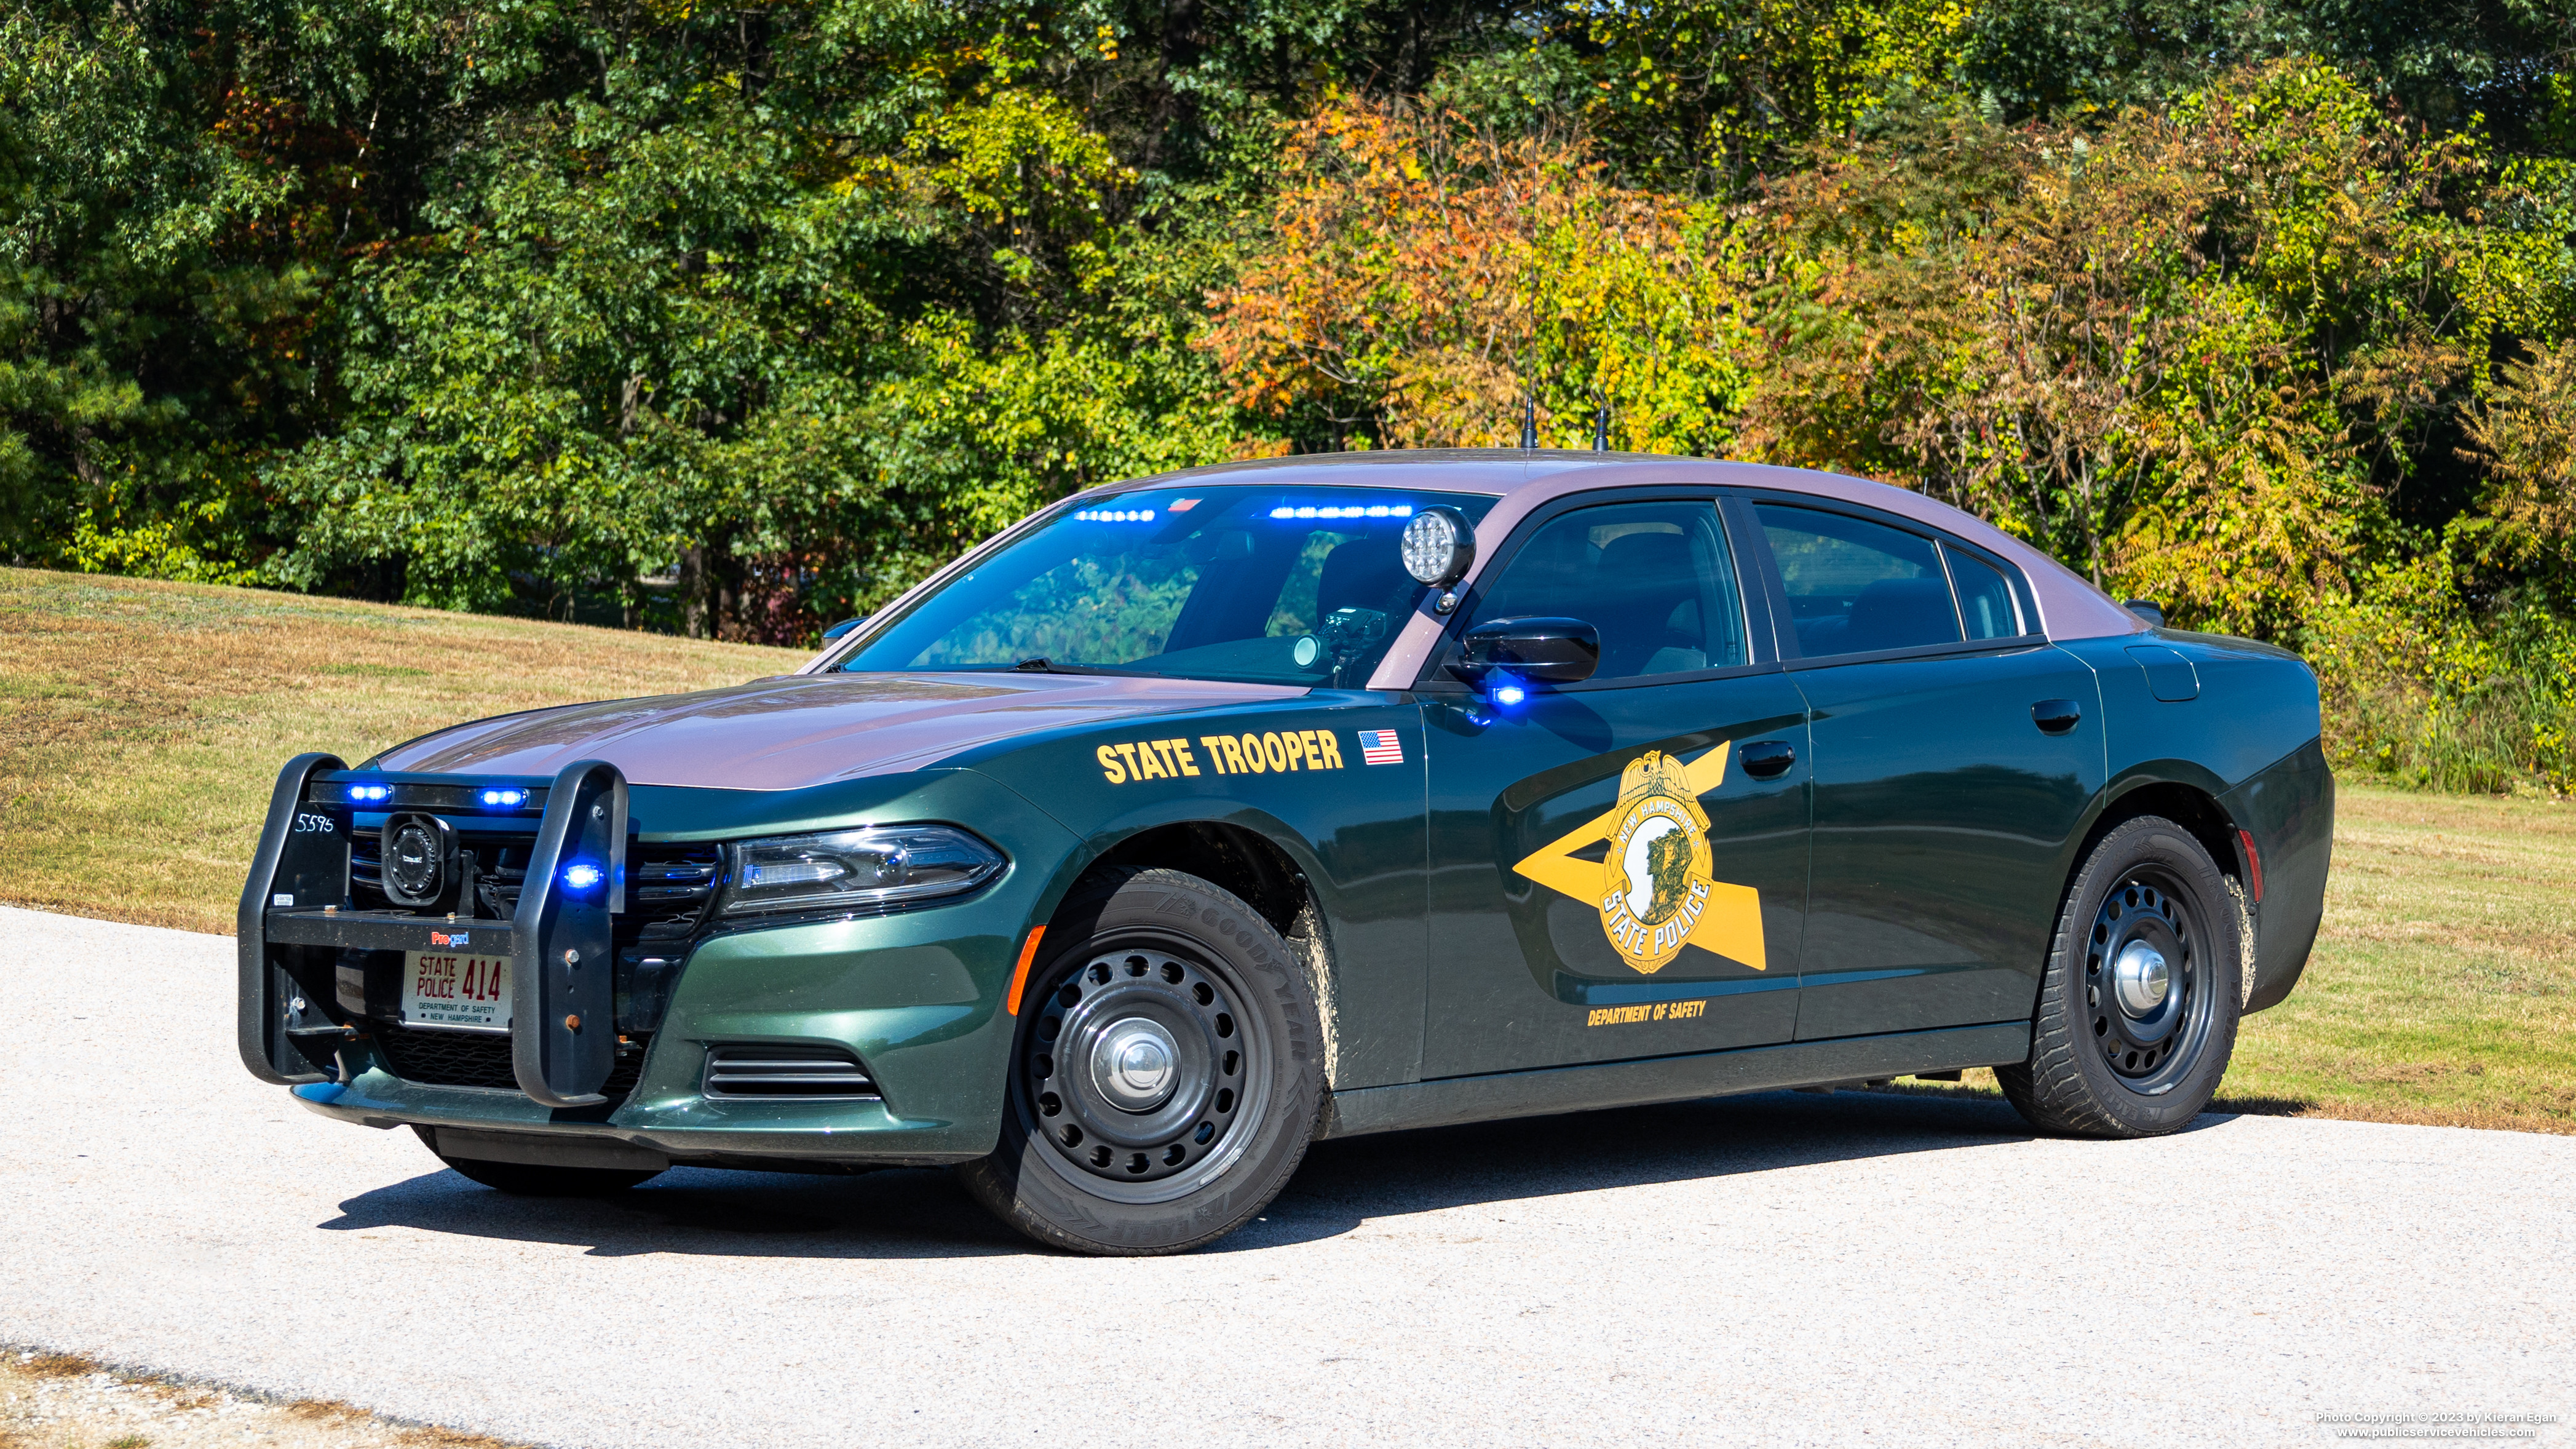 A photo  of New Hampshire State Police
            Cruiser 414, a 2021 Dodge Charger             taken by Kieran Egan